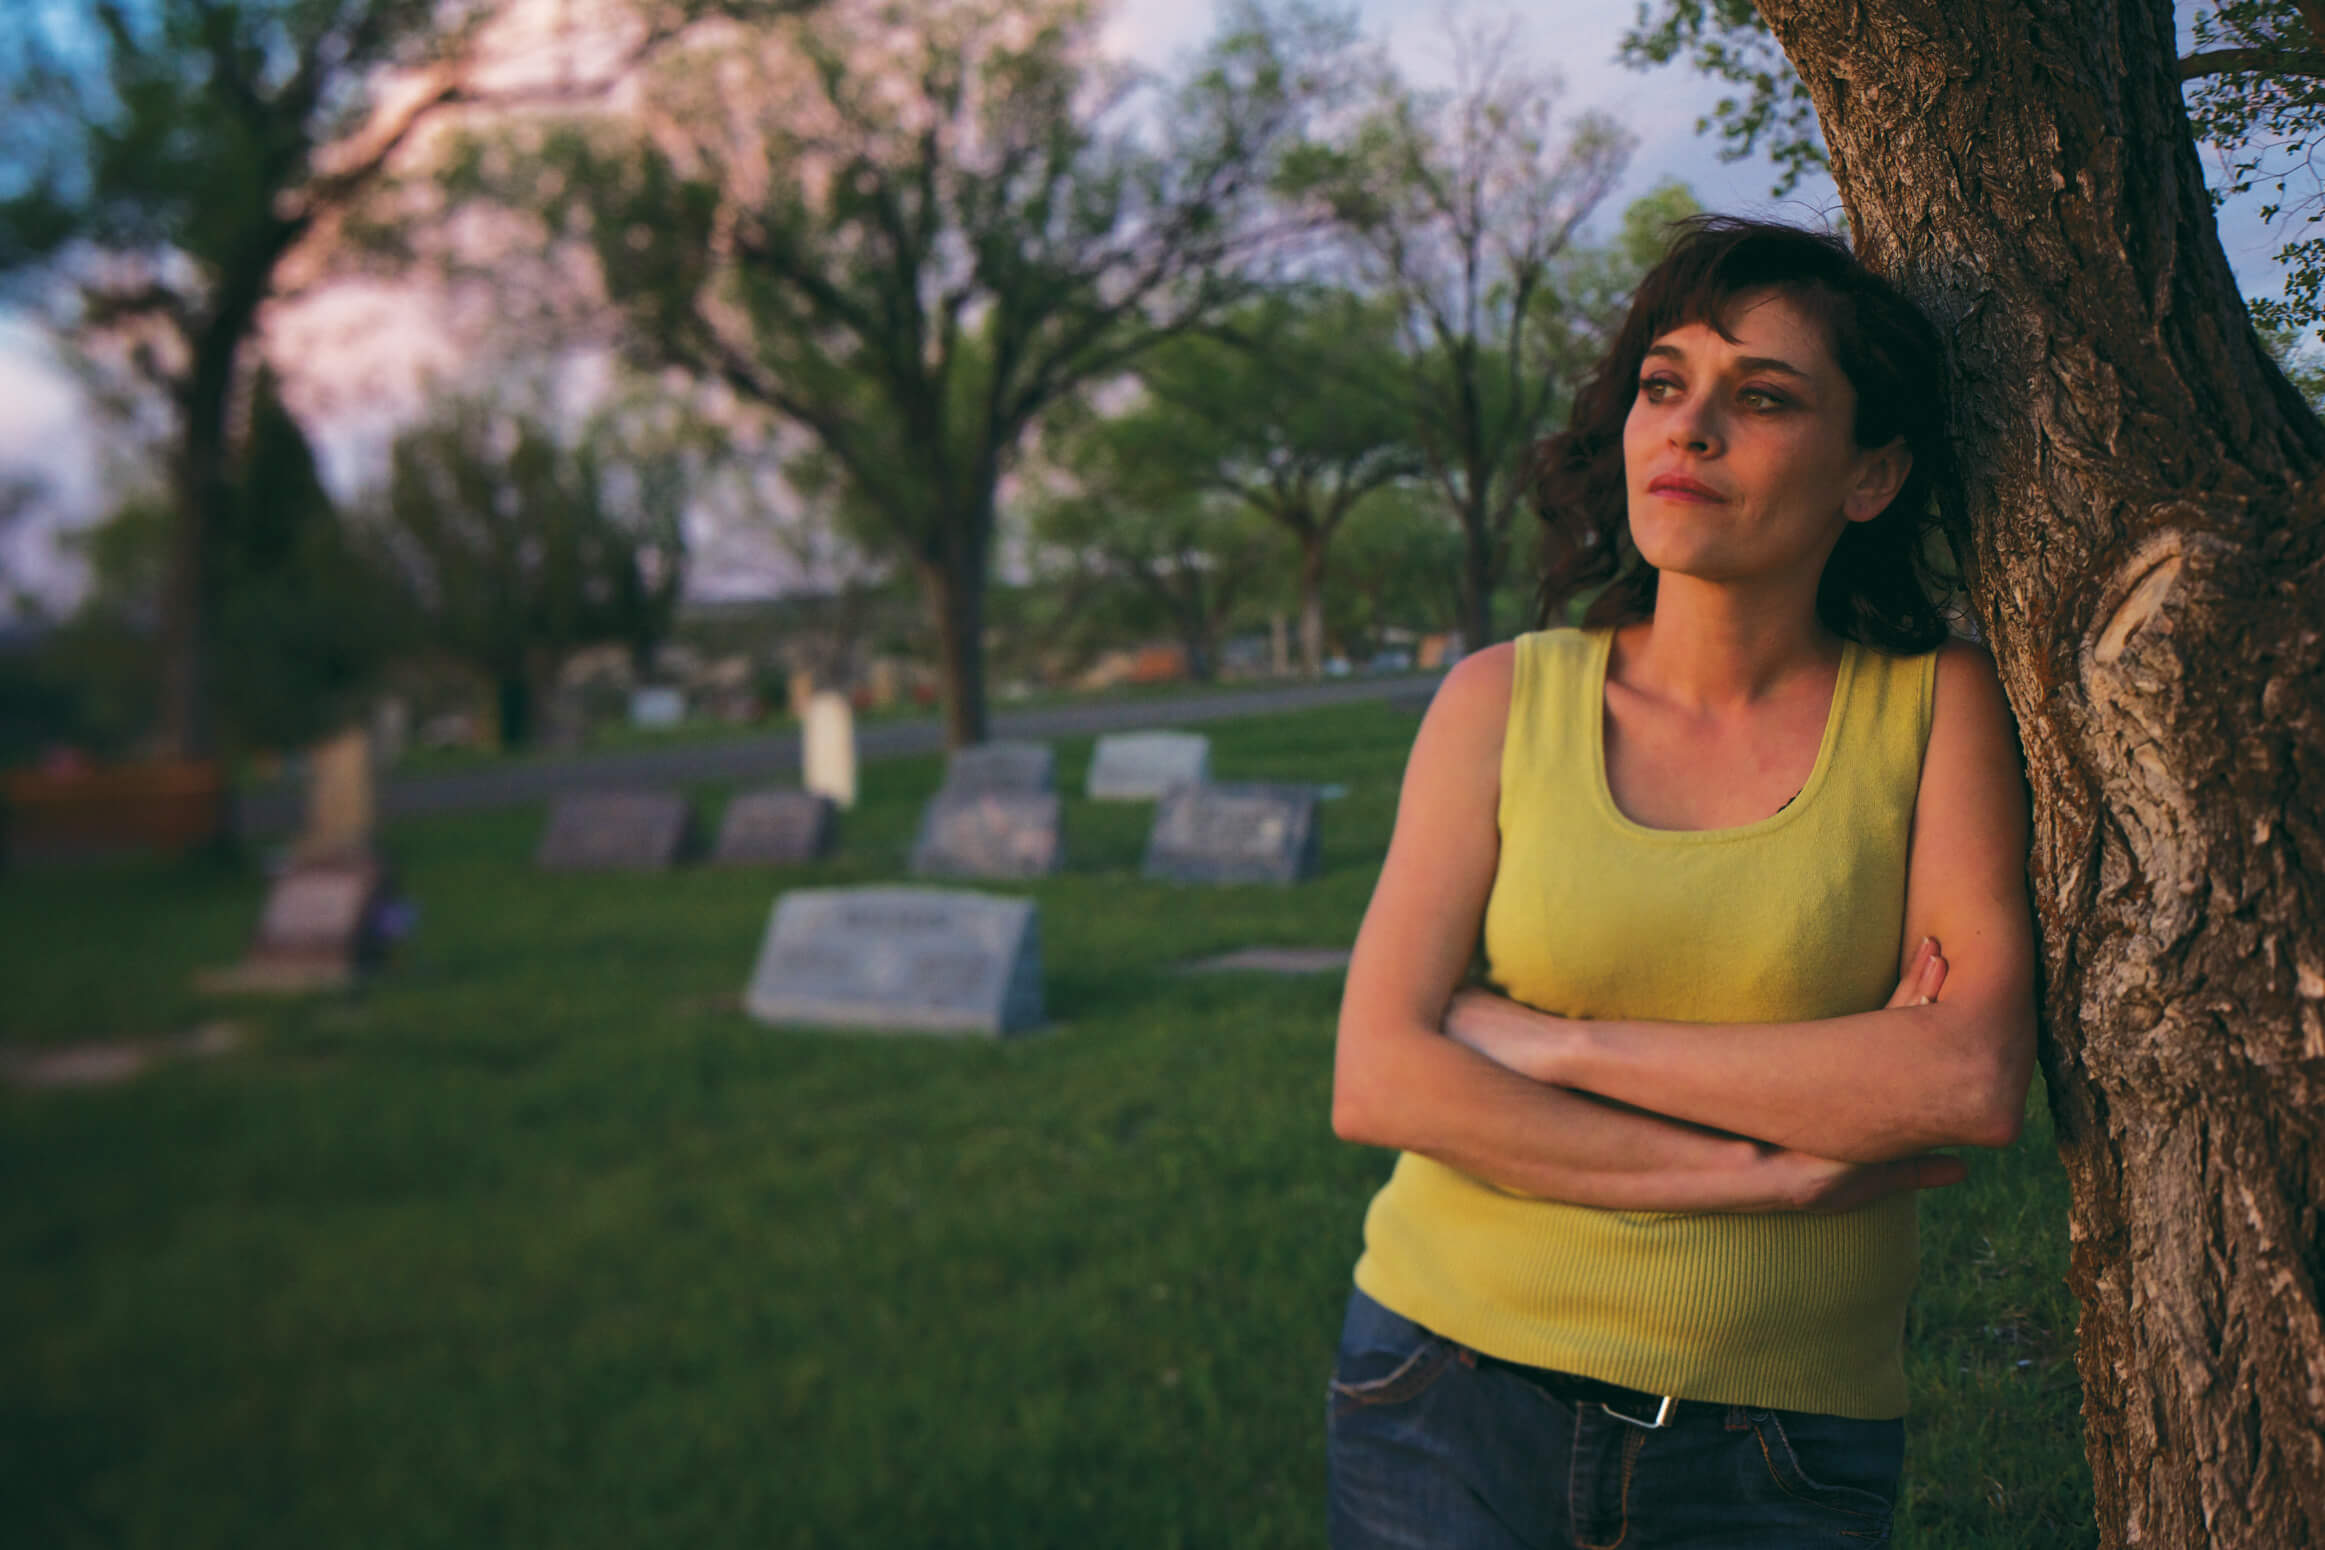 Still from Uranium Drive-In. A woman in a yellow tanktop stands in a cemetery, leaning against a tree.